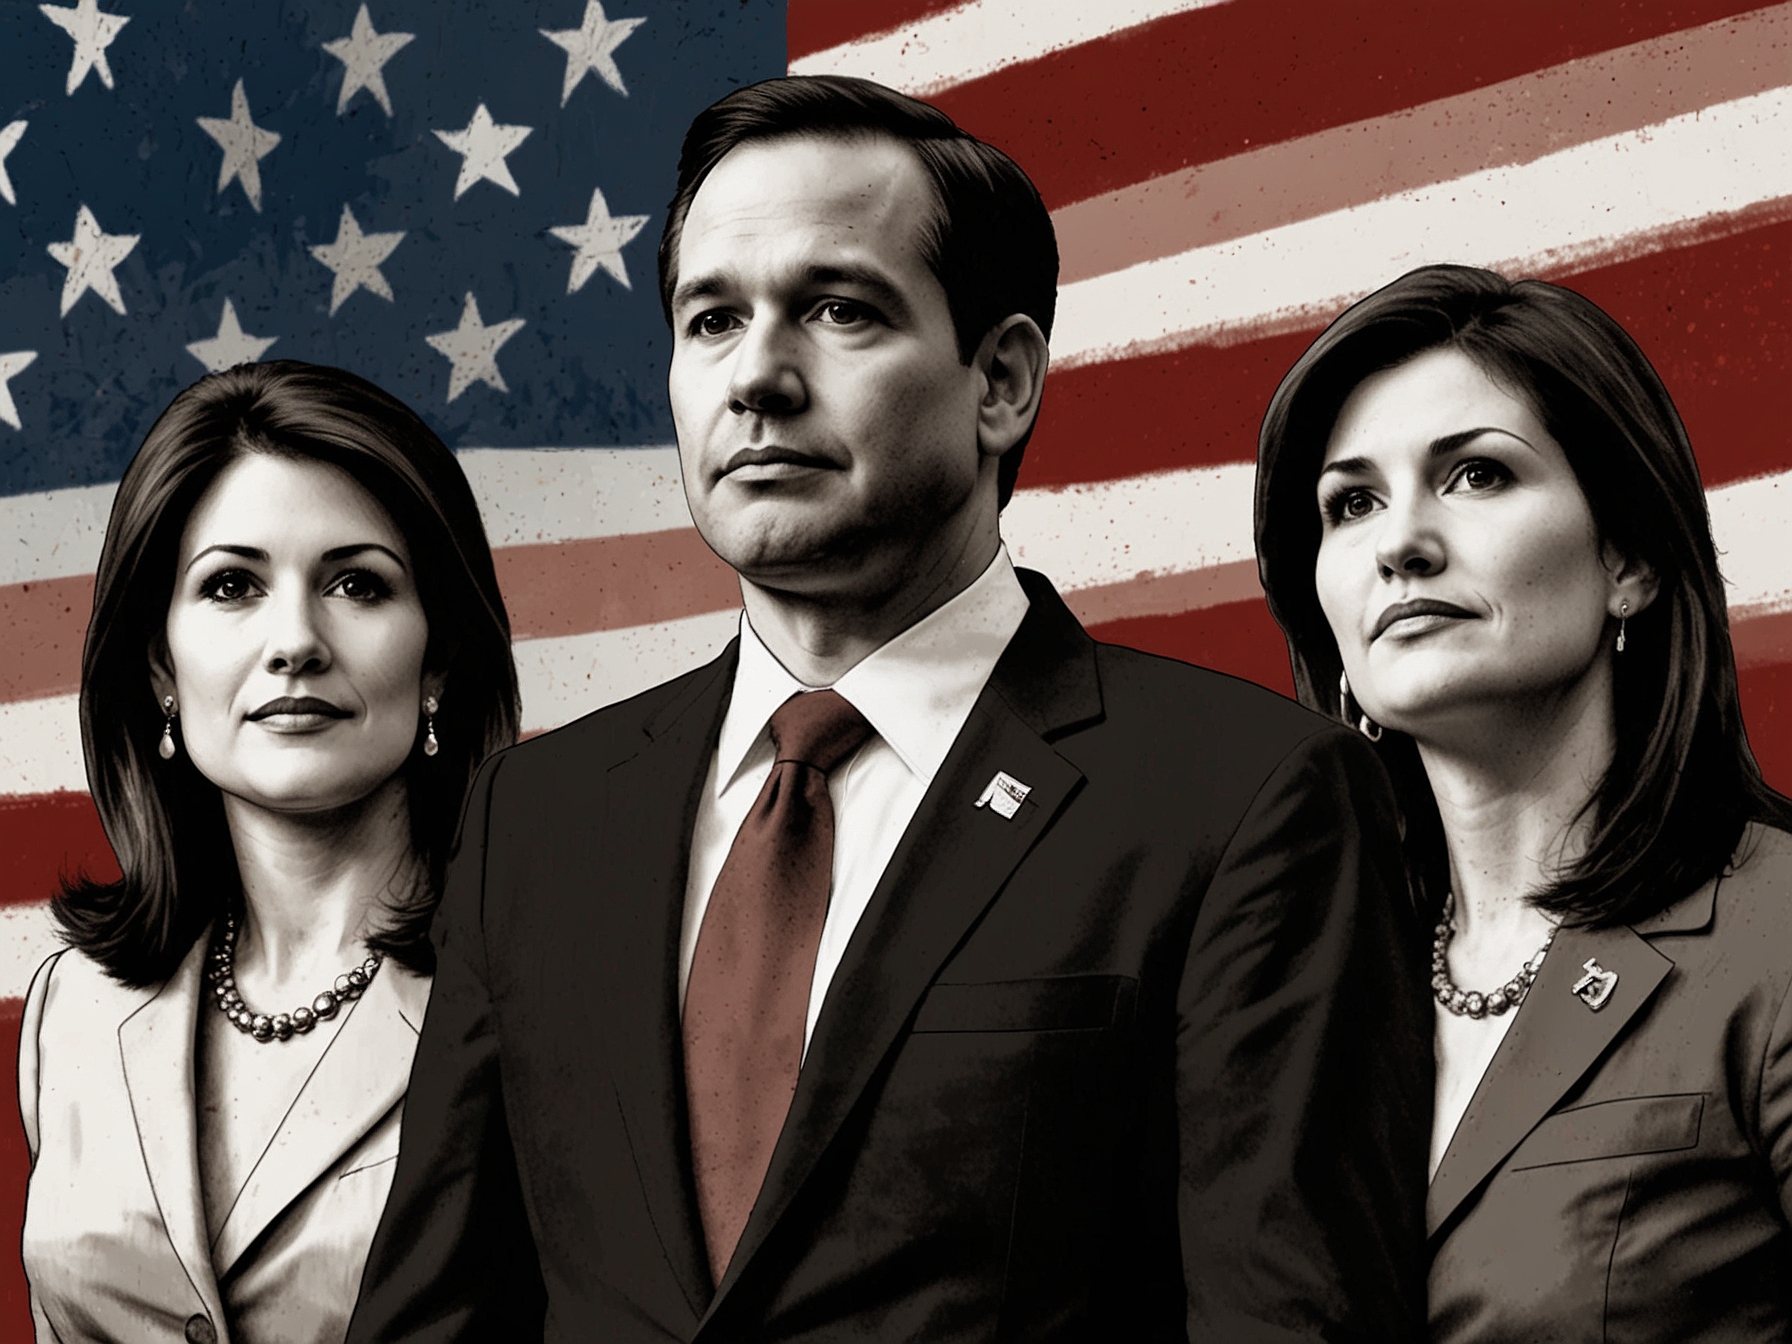 An illustration showing Marco Rubio, Ted Cruz, and Nikki Haley at a political rally, depicting their transformation from harsh critics to potential vice-presidential candidates for Donald Trump.